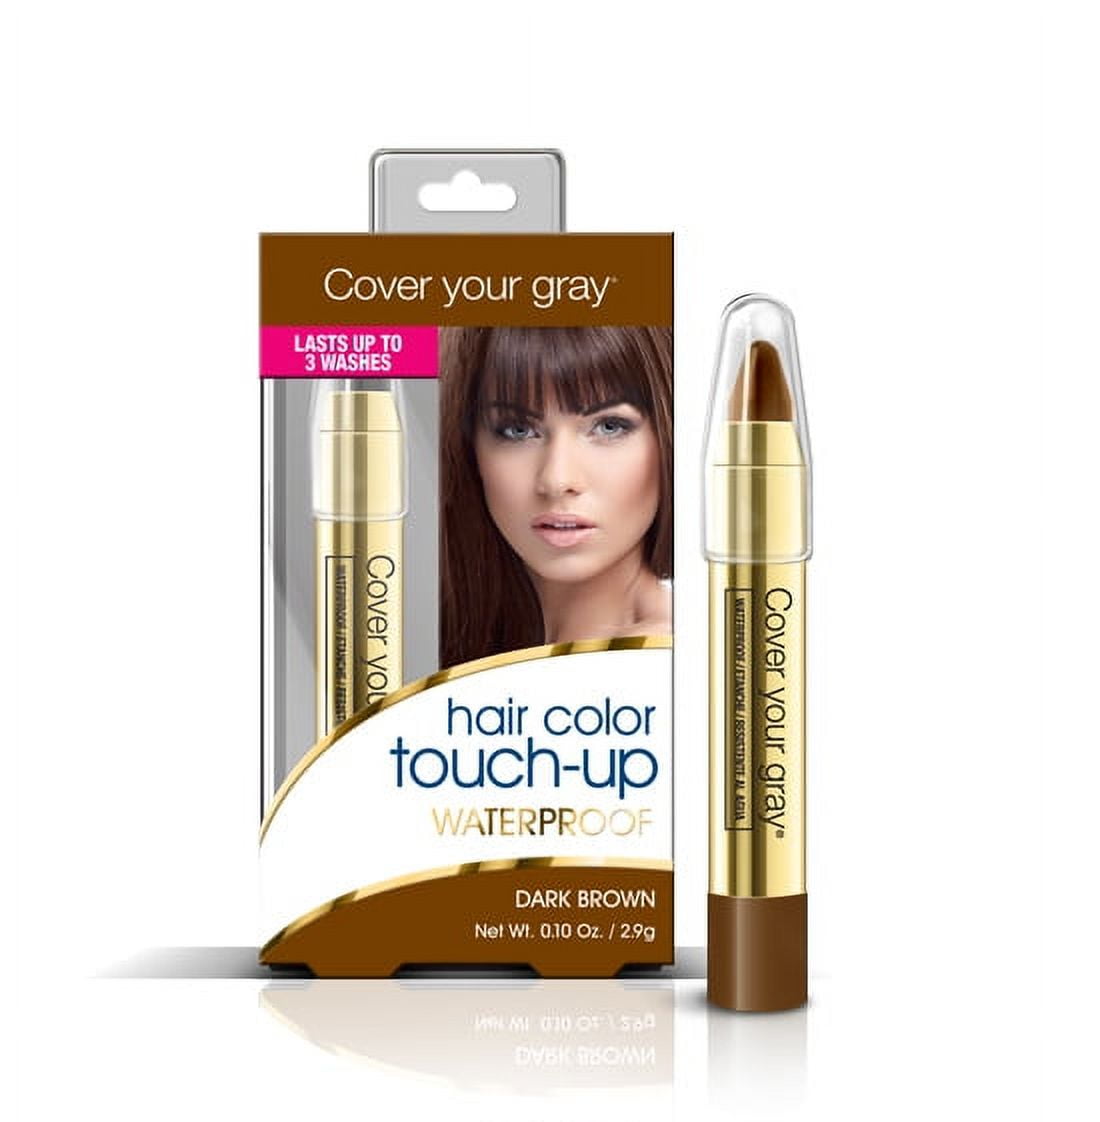 Cover Your Gray Waterproof Hair Color Touch-Up Pencil - Dark Brown